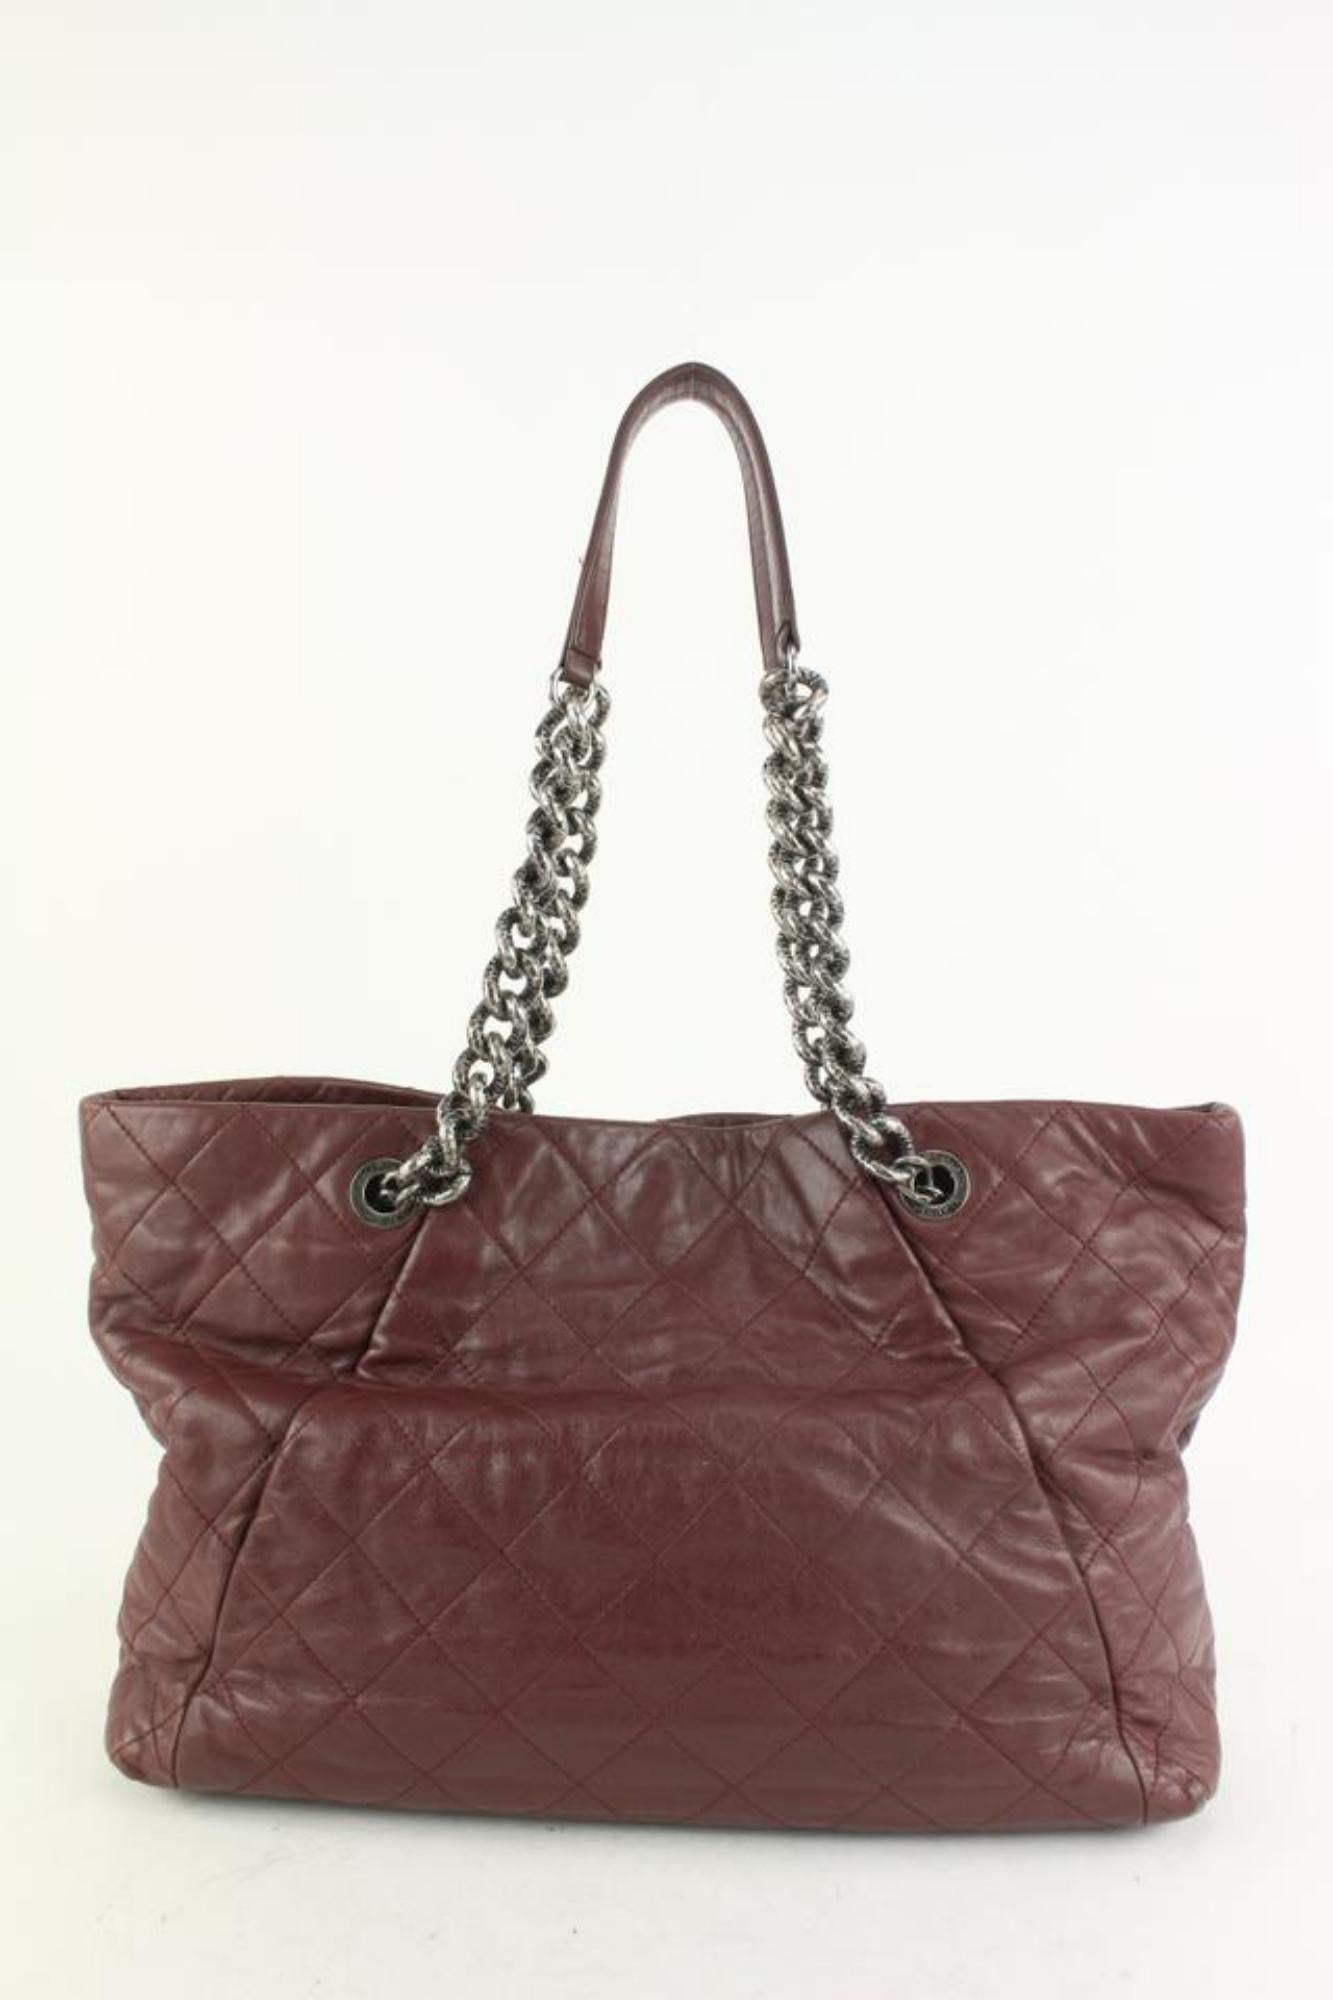 Chanel Dark Red Quilted Leather Antique Silver Chain Tote 118c36 For Sale 2